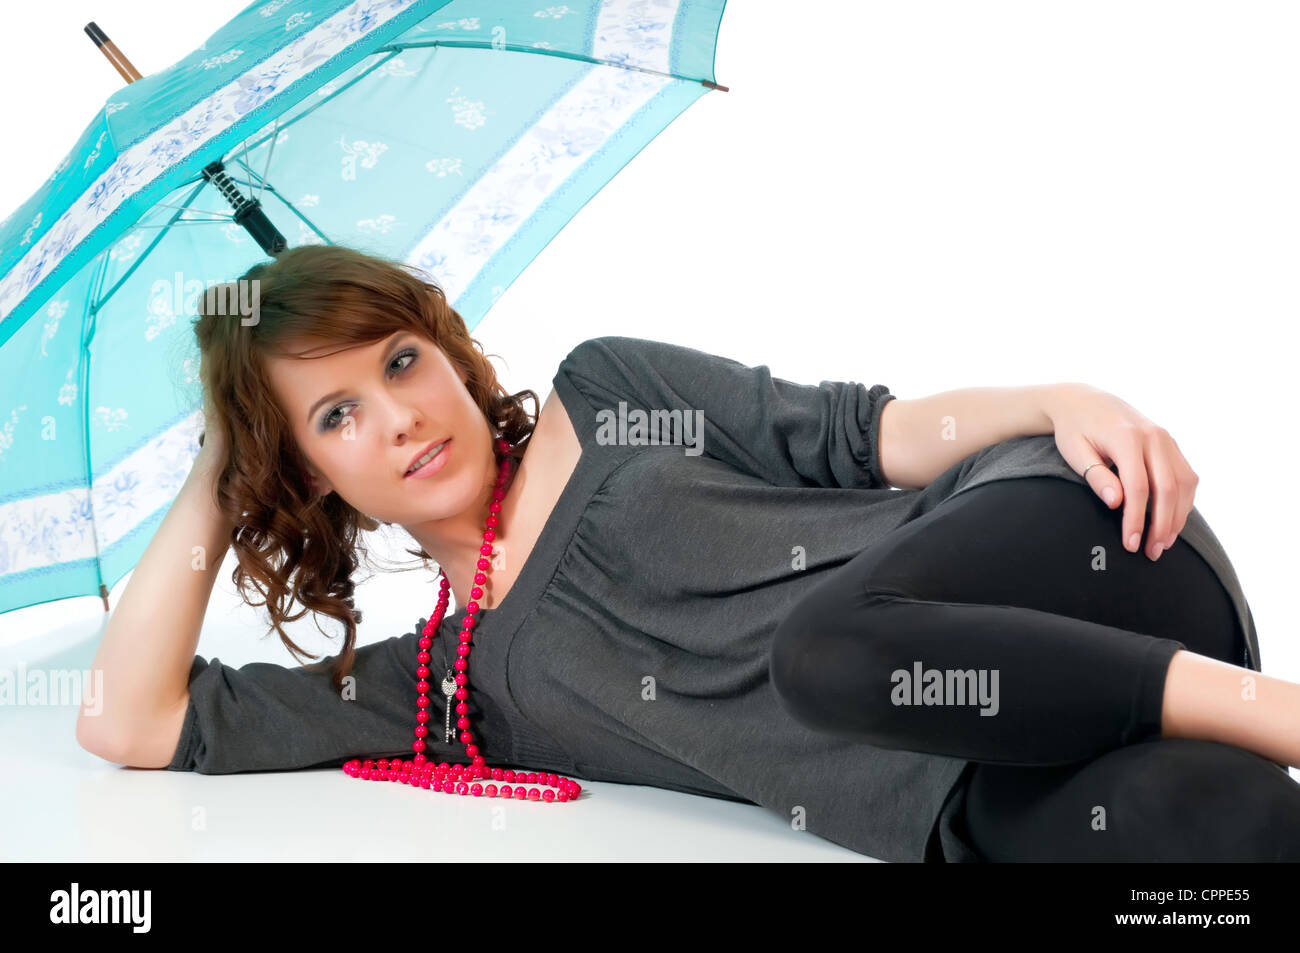 Beautiful young woman reclining under an umbrella against a white background and reflective floor. Stock Photo